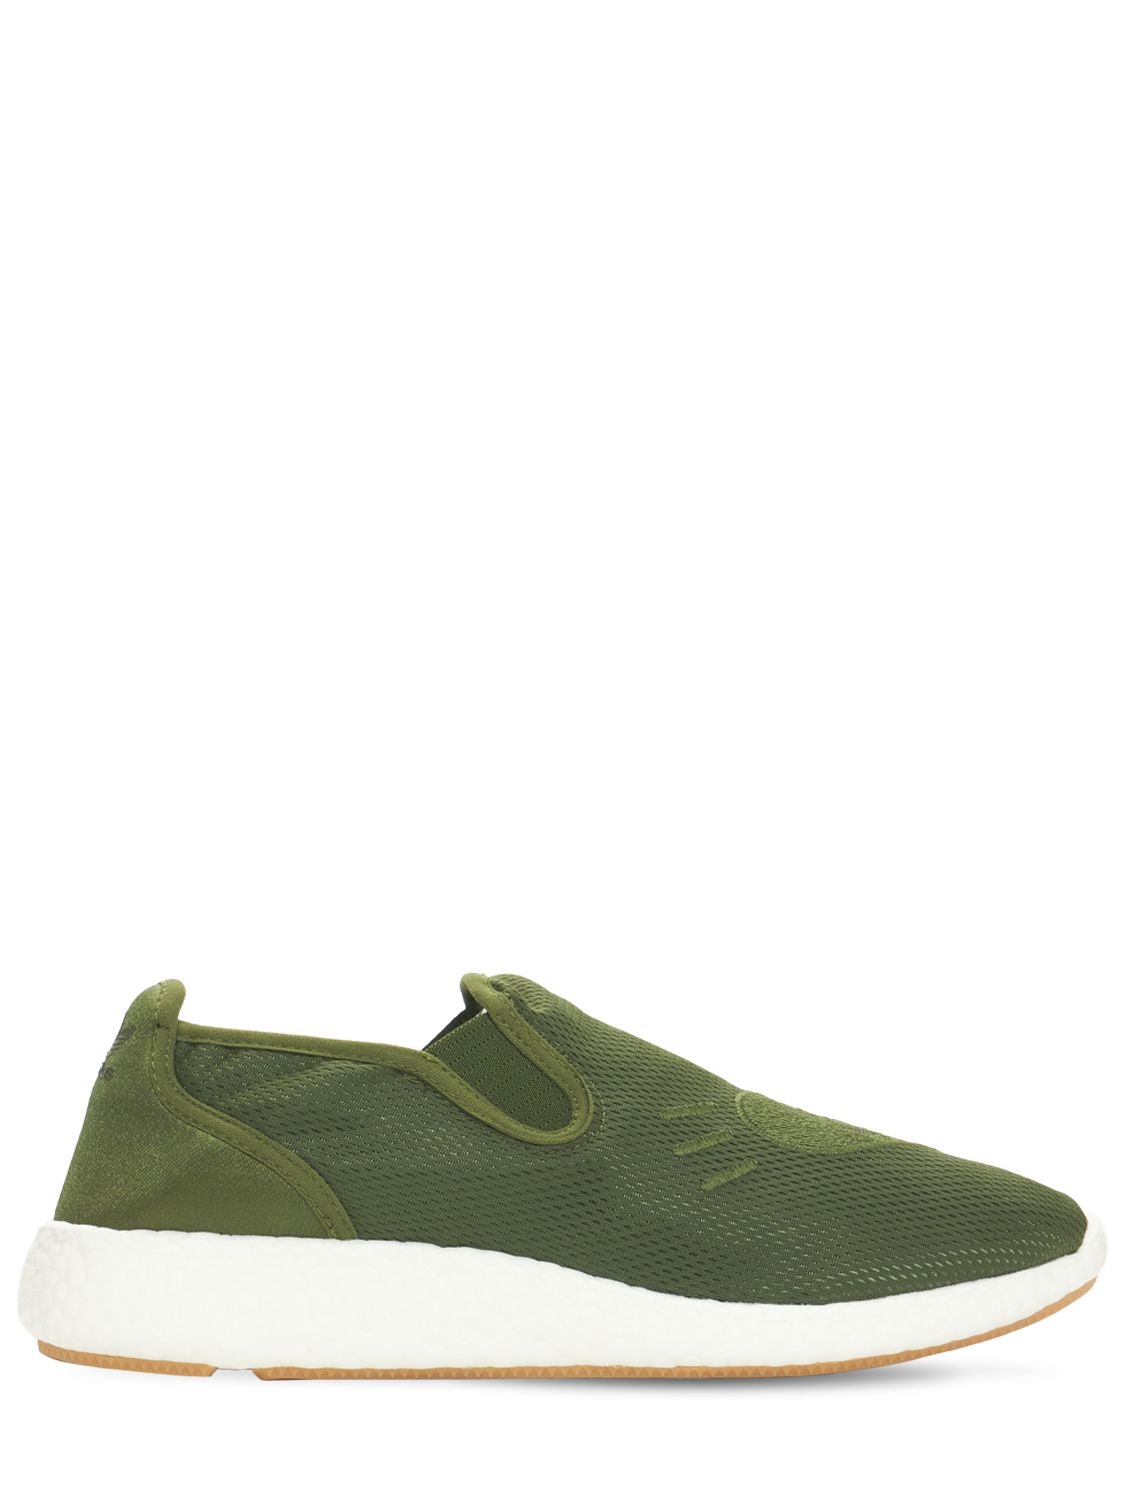 Adidas X Human Made Hm Slip-on Pure Sneakers In Wild Pine